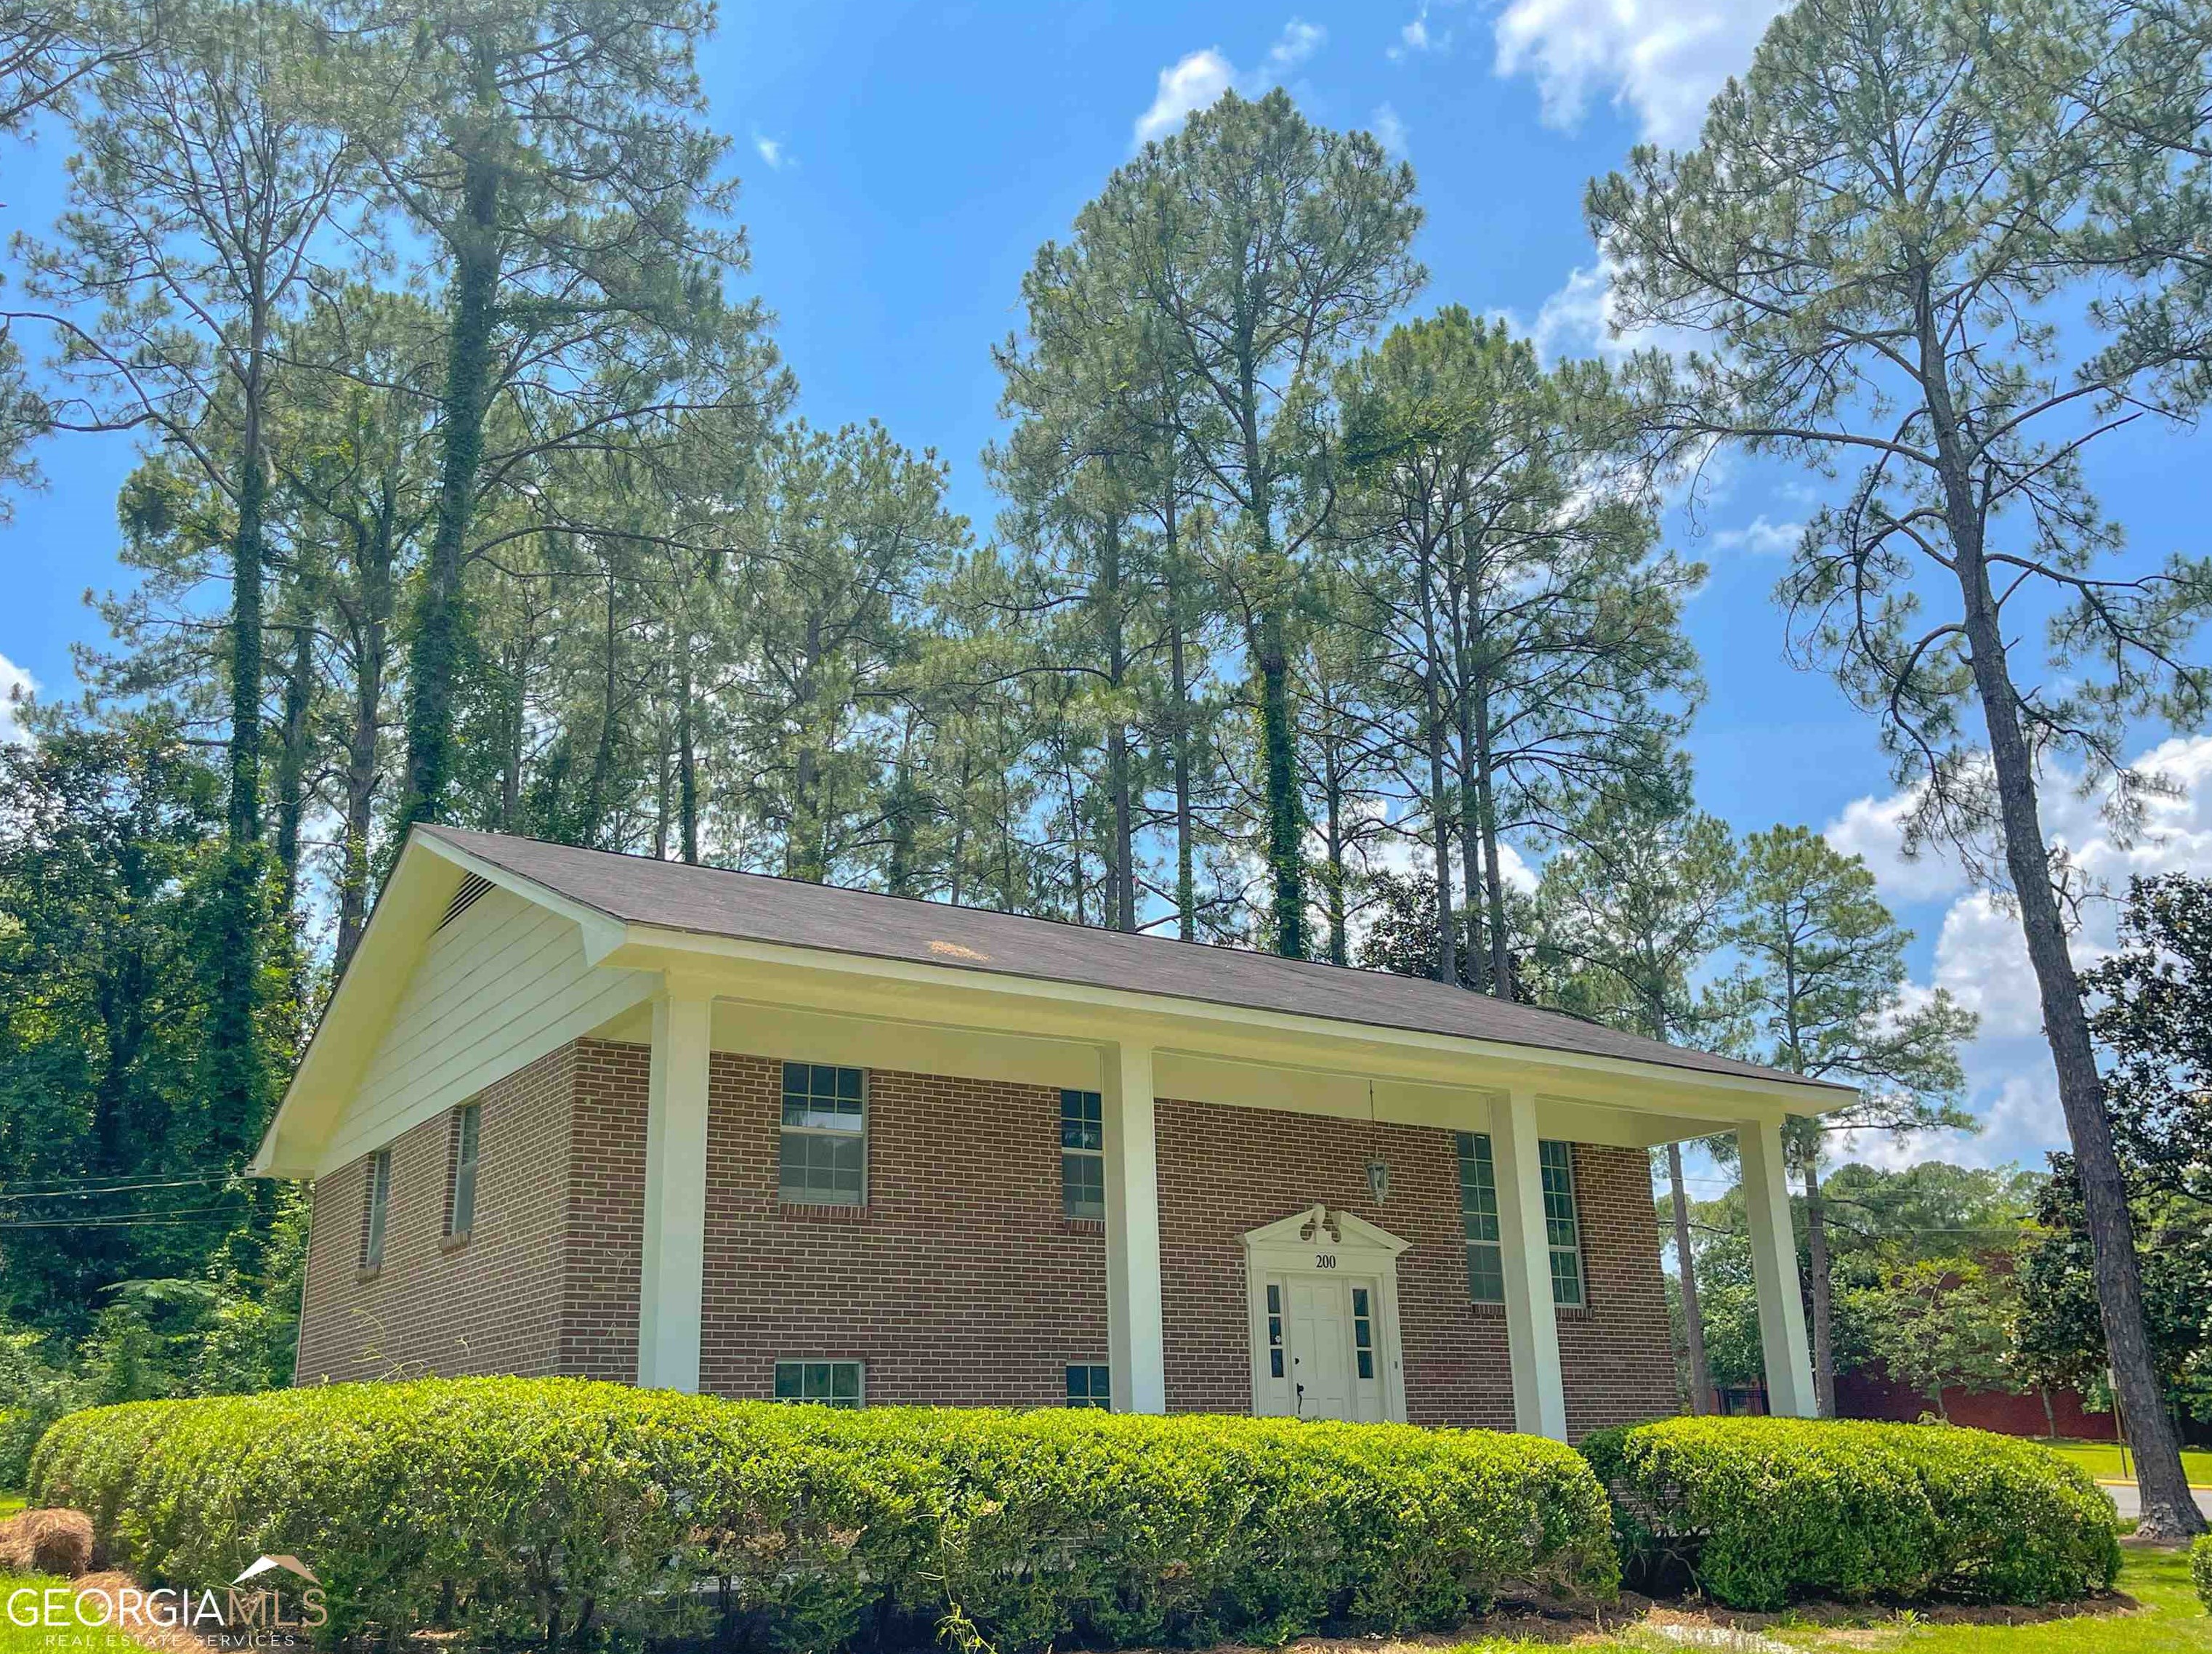 200 Pine Ave, Moultrie, GA 31768